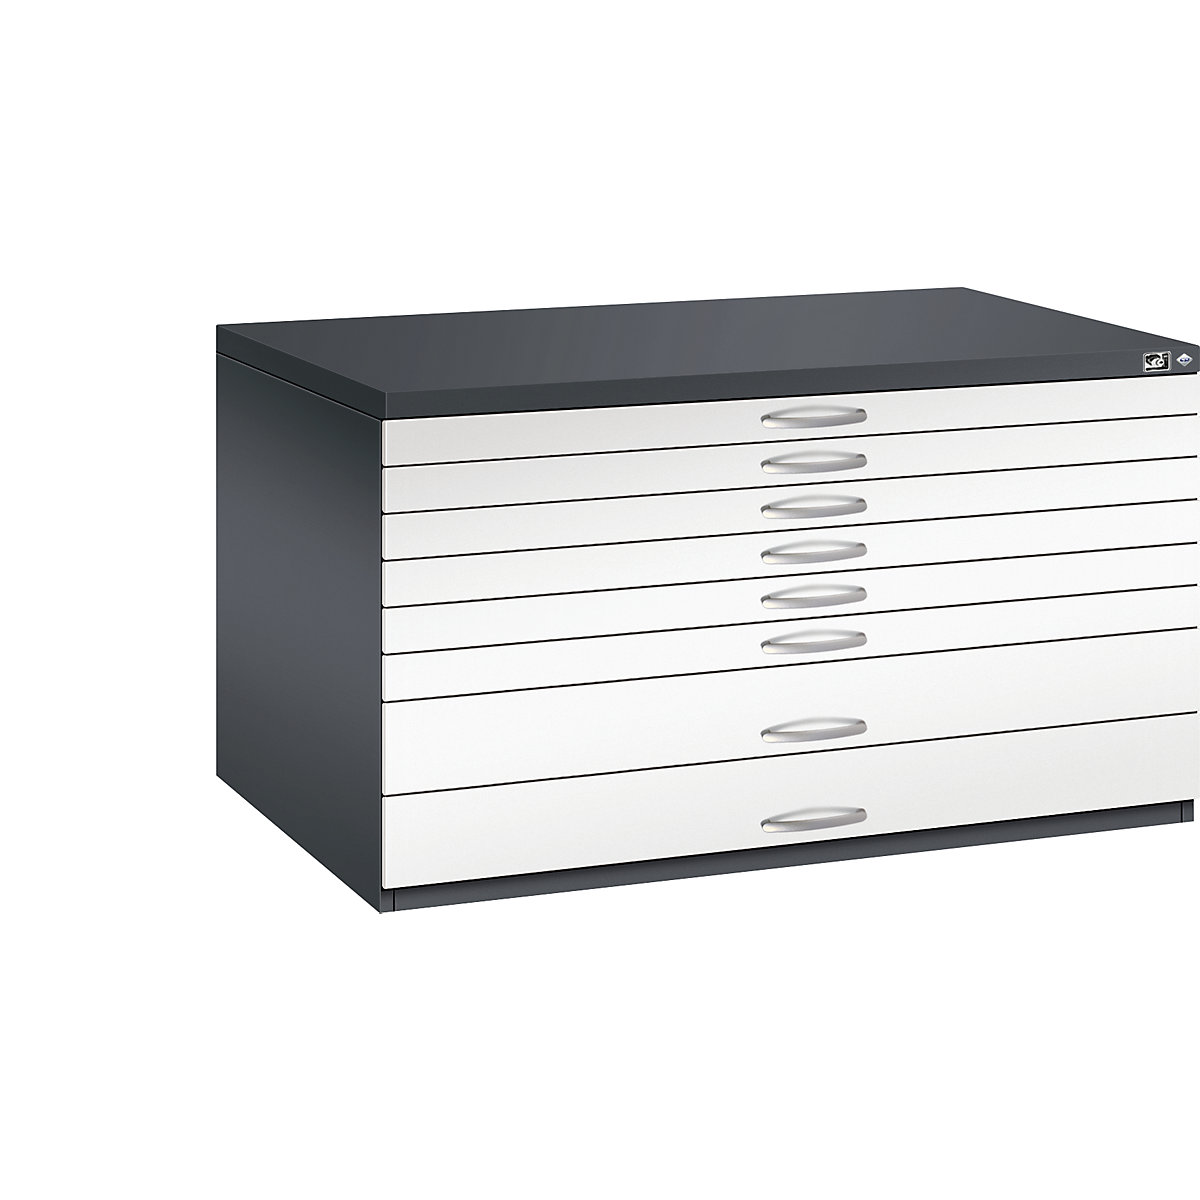 Drawing cabinet – C+P, A0, 8 drawers, height 760 mm, black grey / traffic white-13